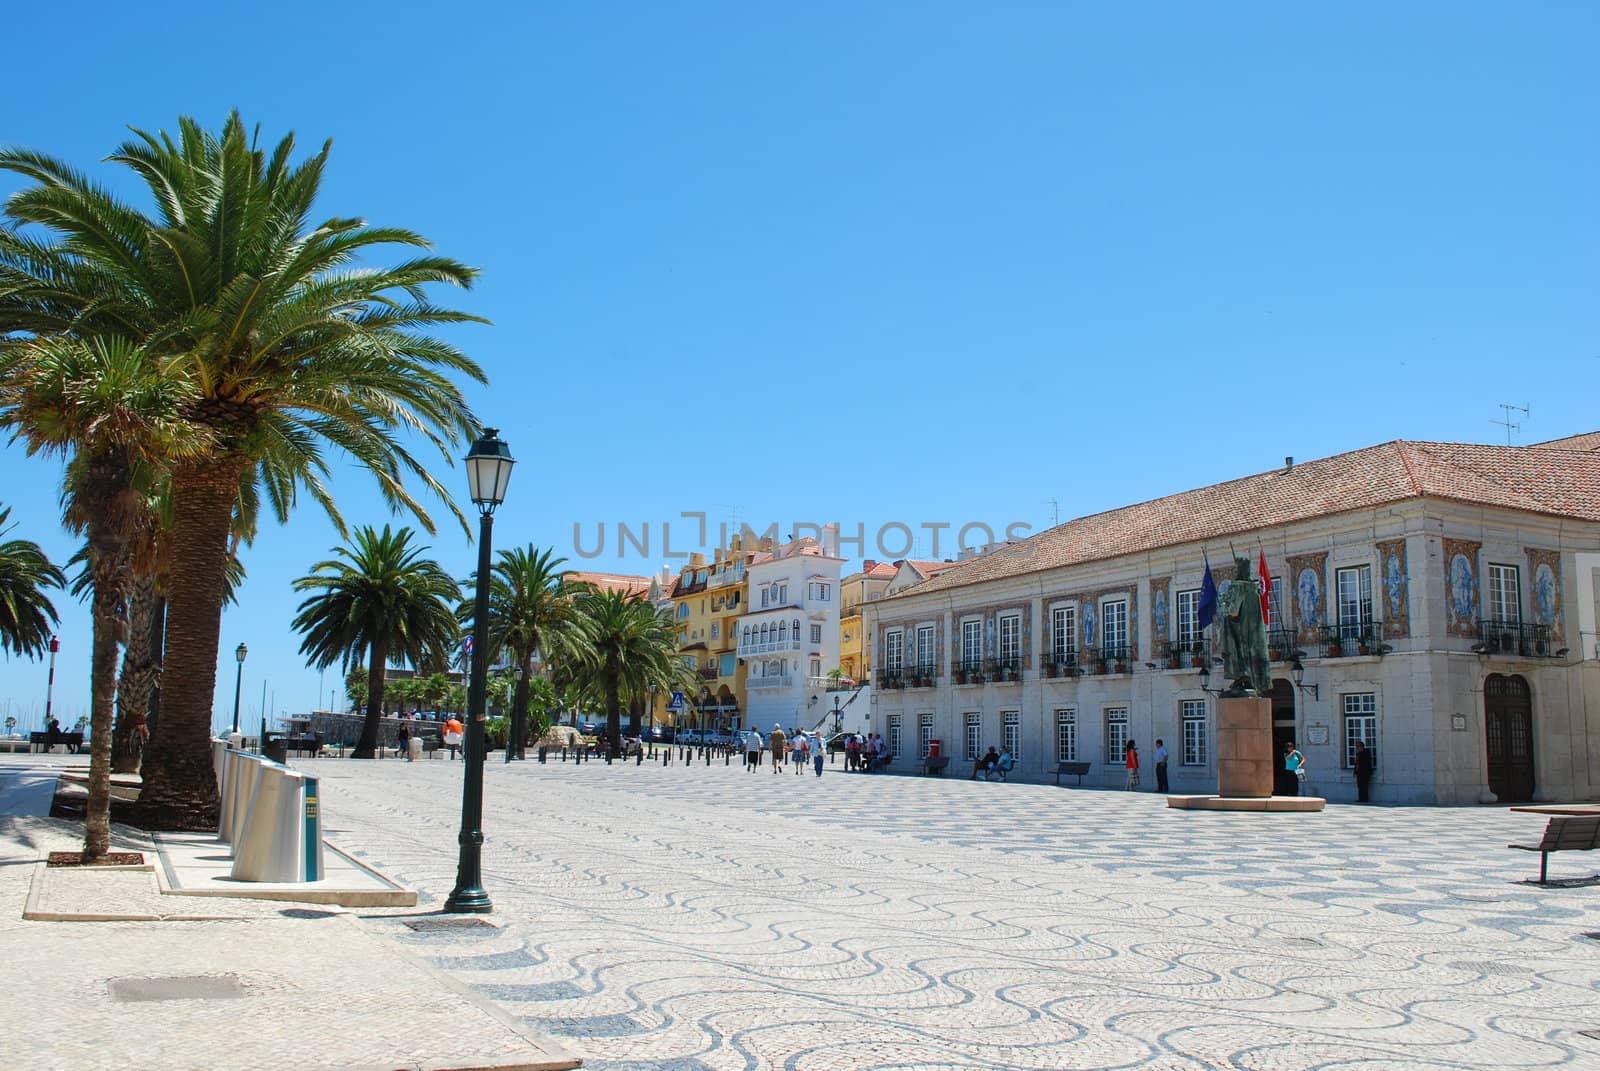 cityscape square with palm trees in Cascais, Portugal